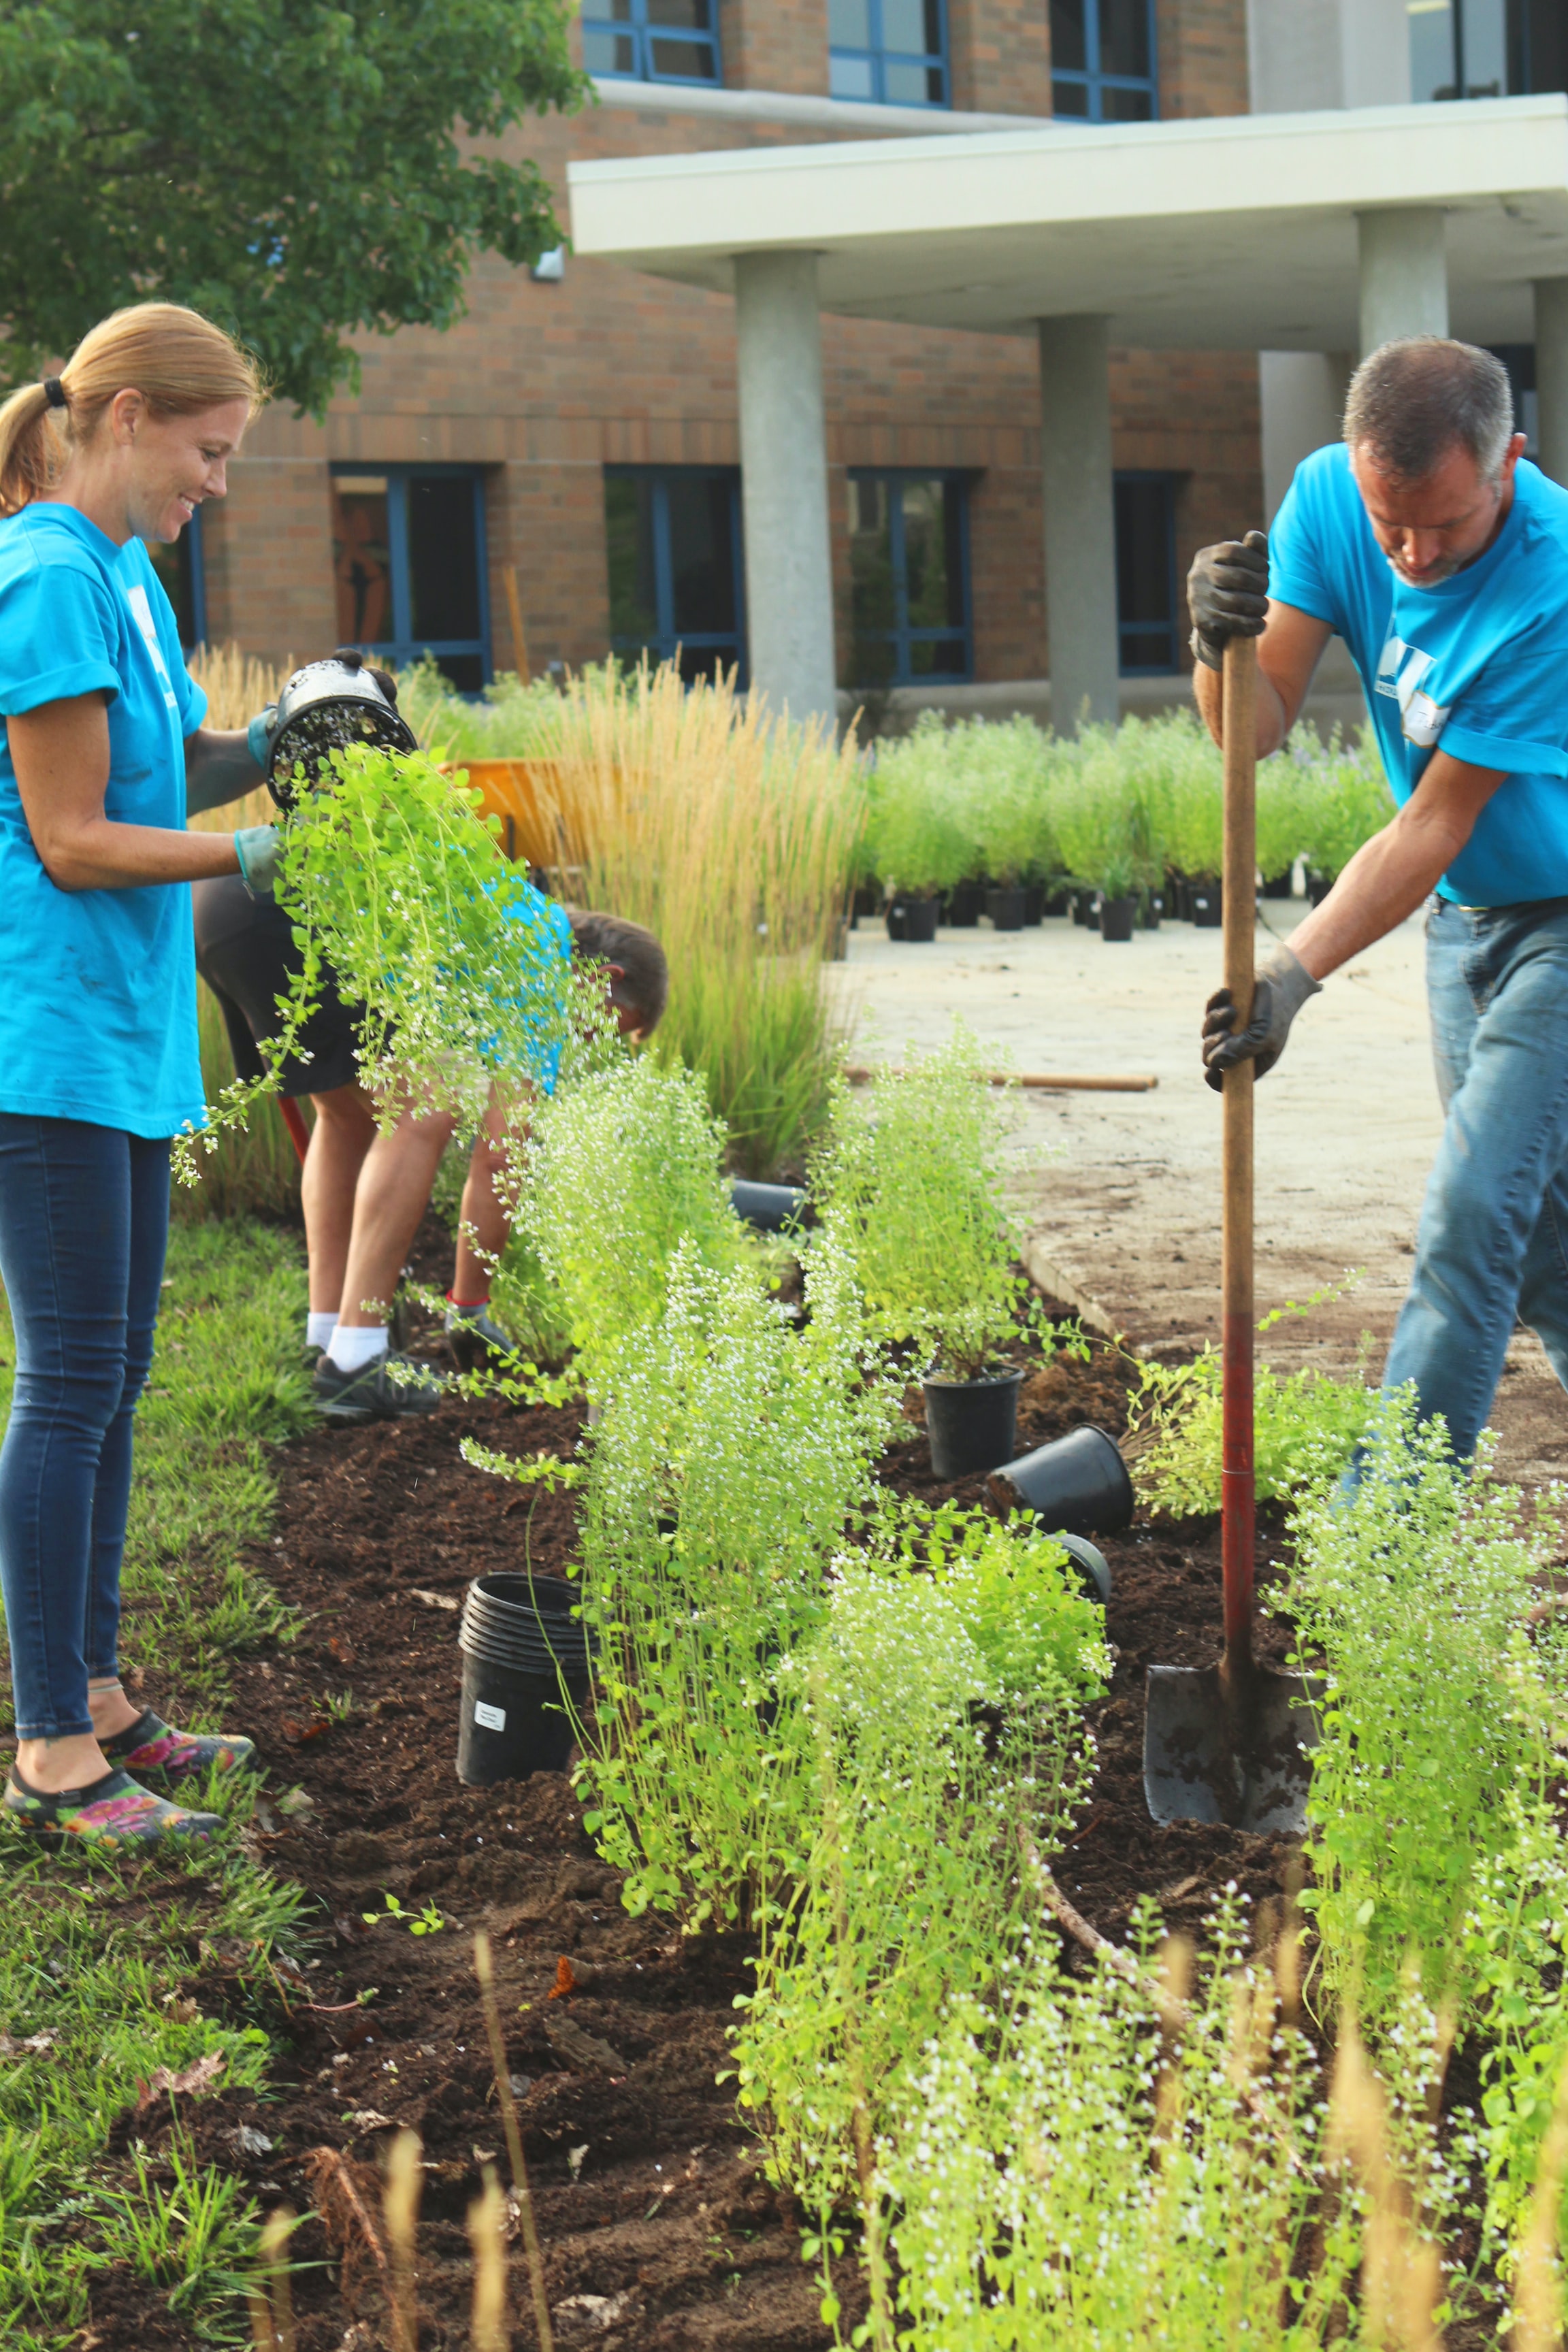 Students volunteering and gardening on campus.